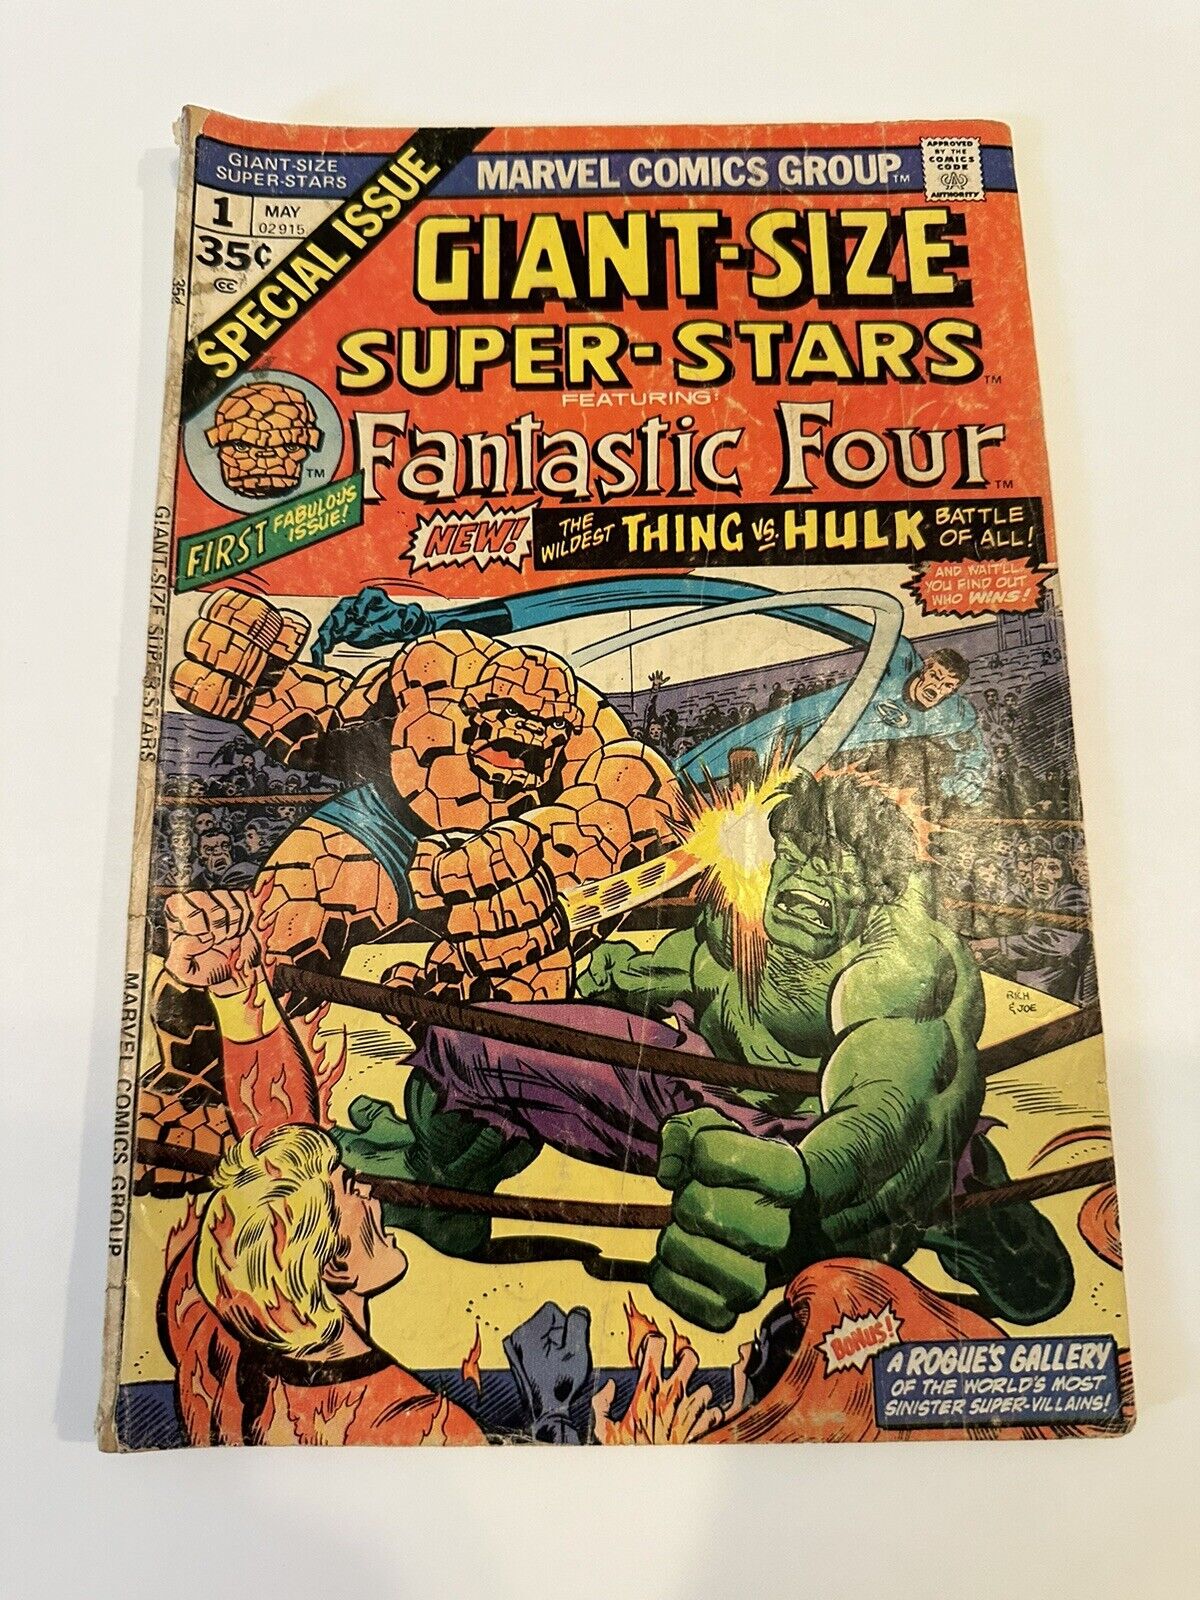 Giant-Size Super-Stars #1 (Marvel, May 1974)